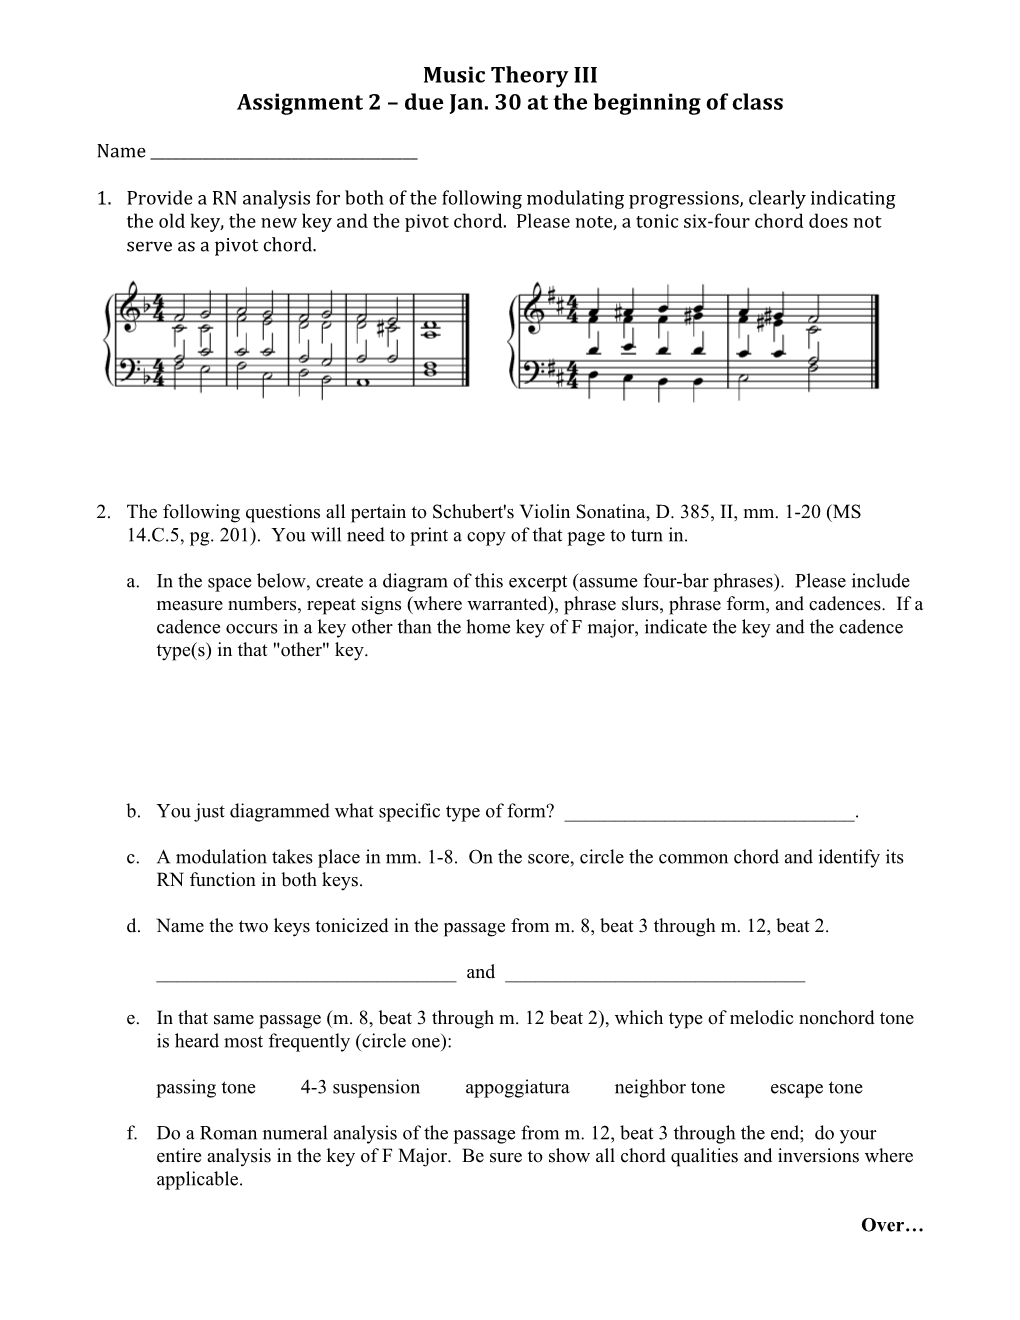 Music Theory III Assignment 2 – Due Jan. 30 at the Beginning of Class